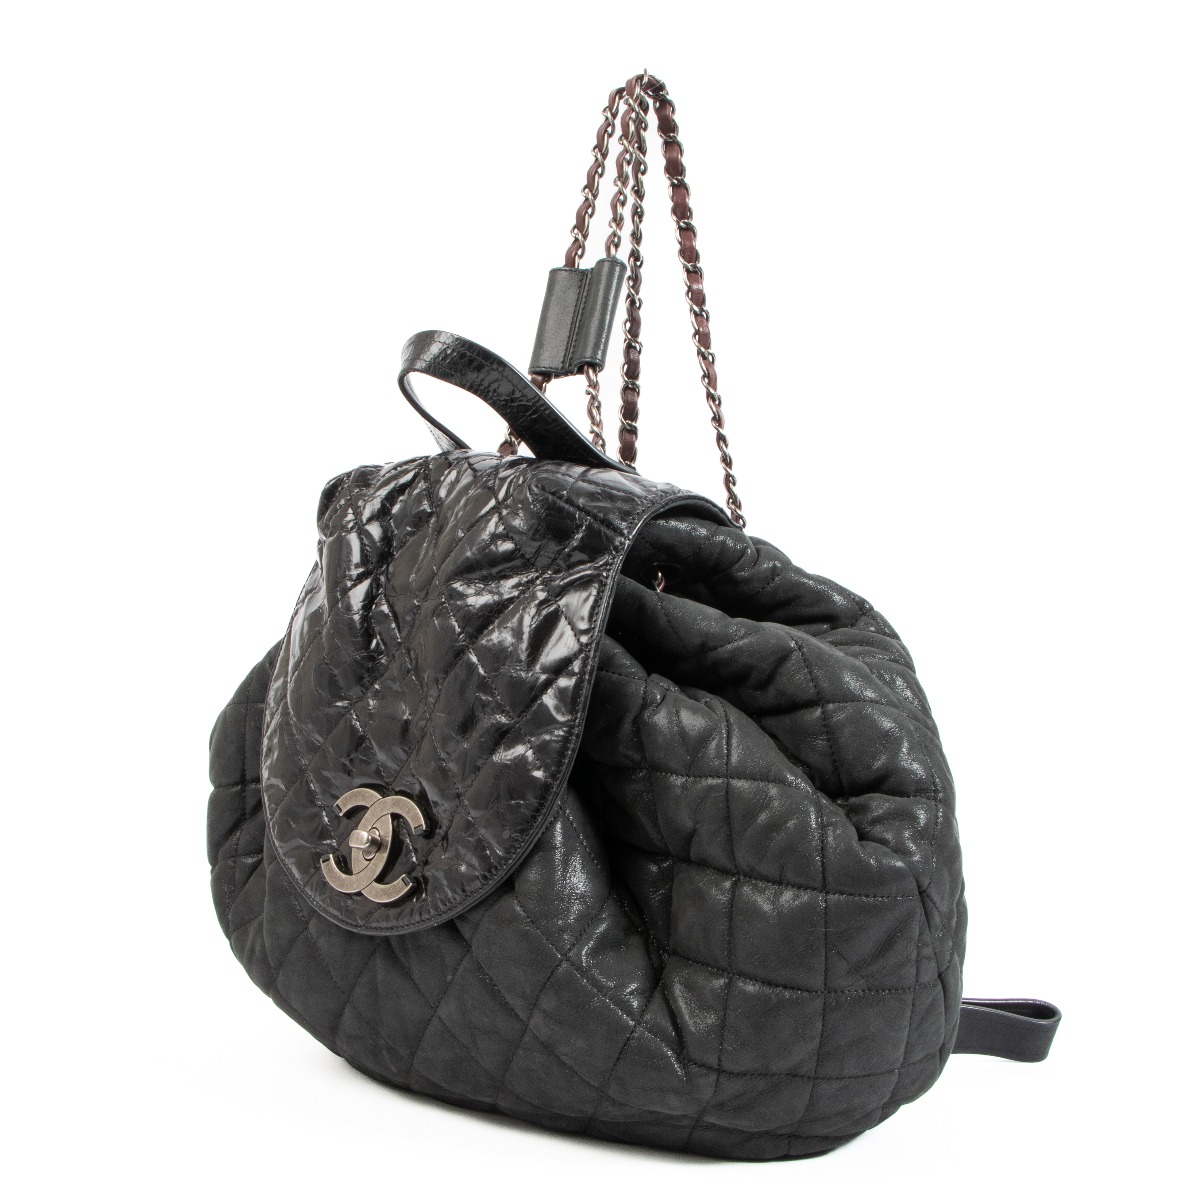 Shop second hand Chanel backpacks